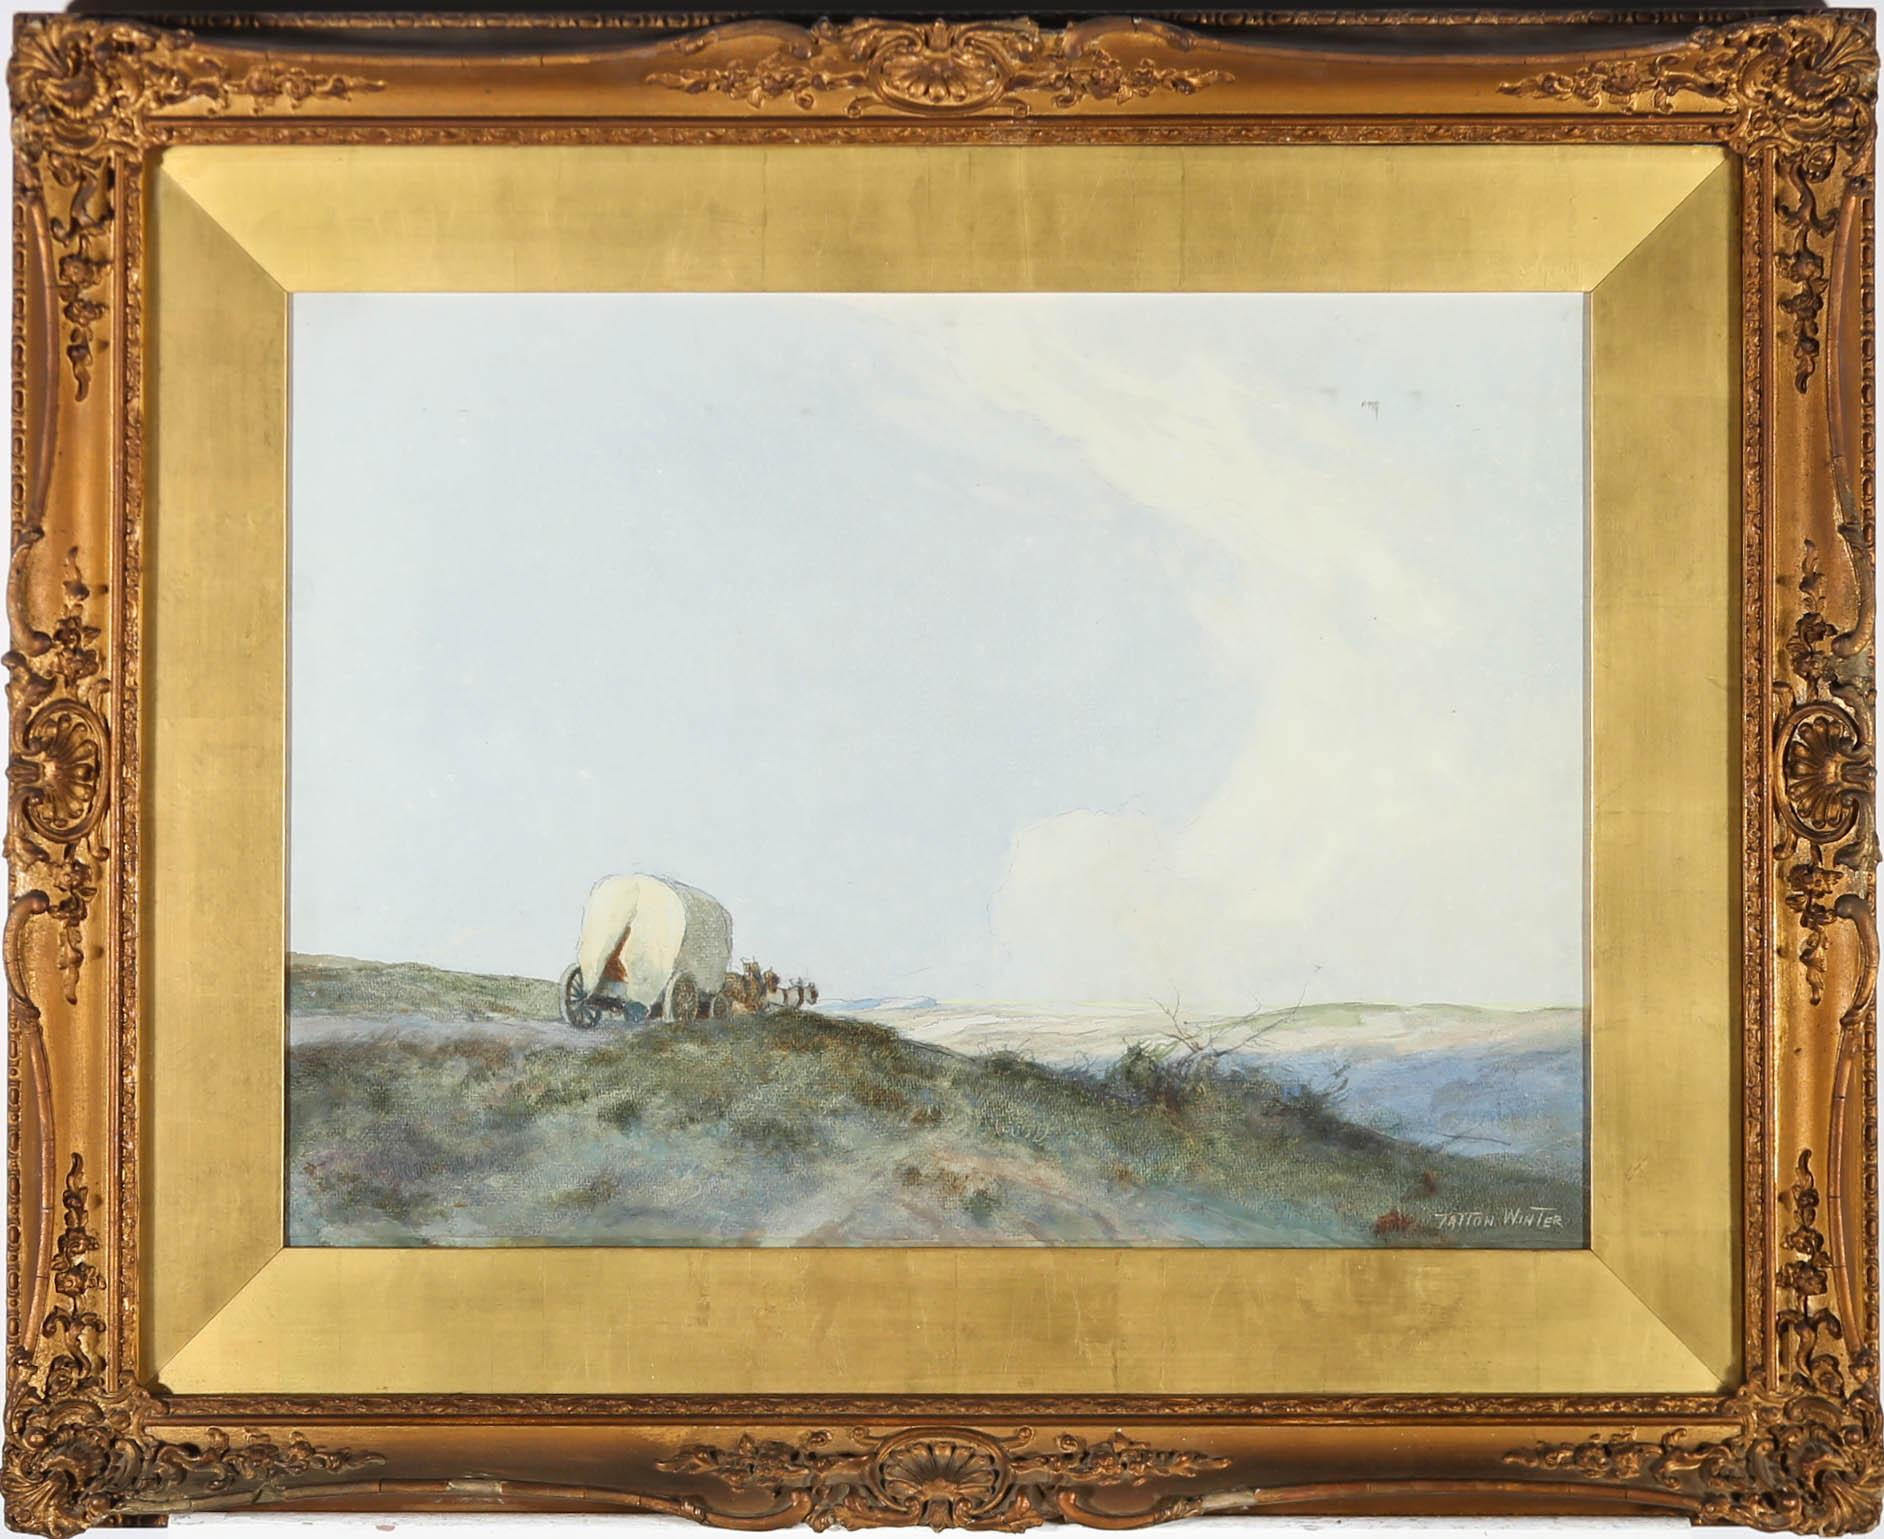 A delightful scene depicting a horse drawn cart in a vast landscape. Signed to the lower right. Presented in a swept gilt frame ornate shall and foliate mouldings. On paper.